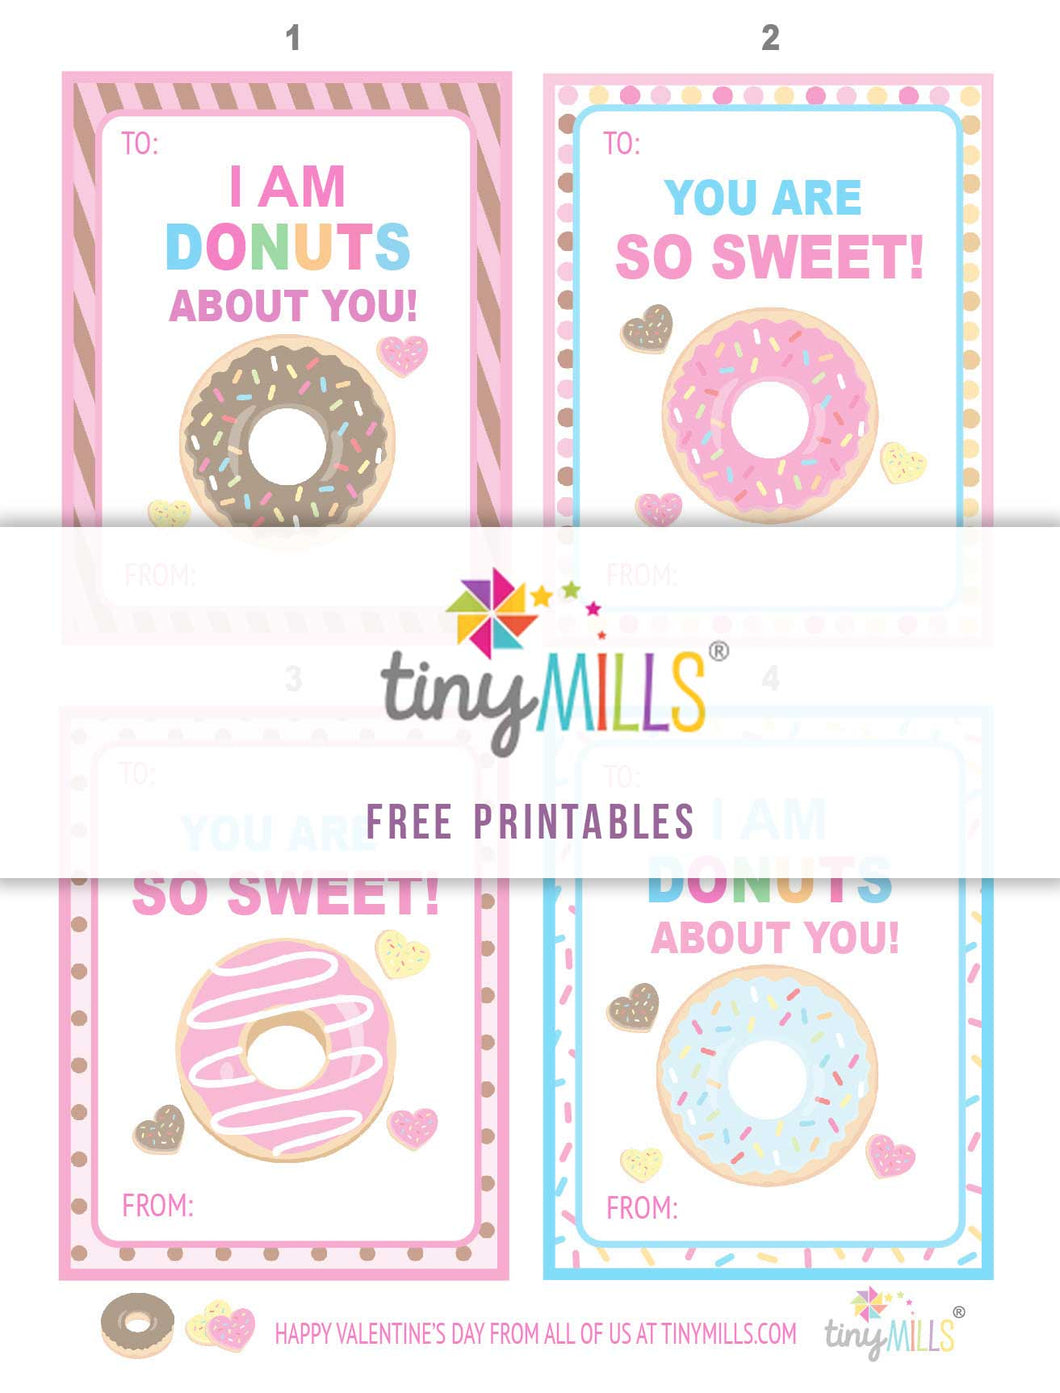 Free Printable Valentine's Day Cards - Sweet Donuts